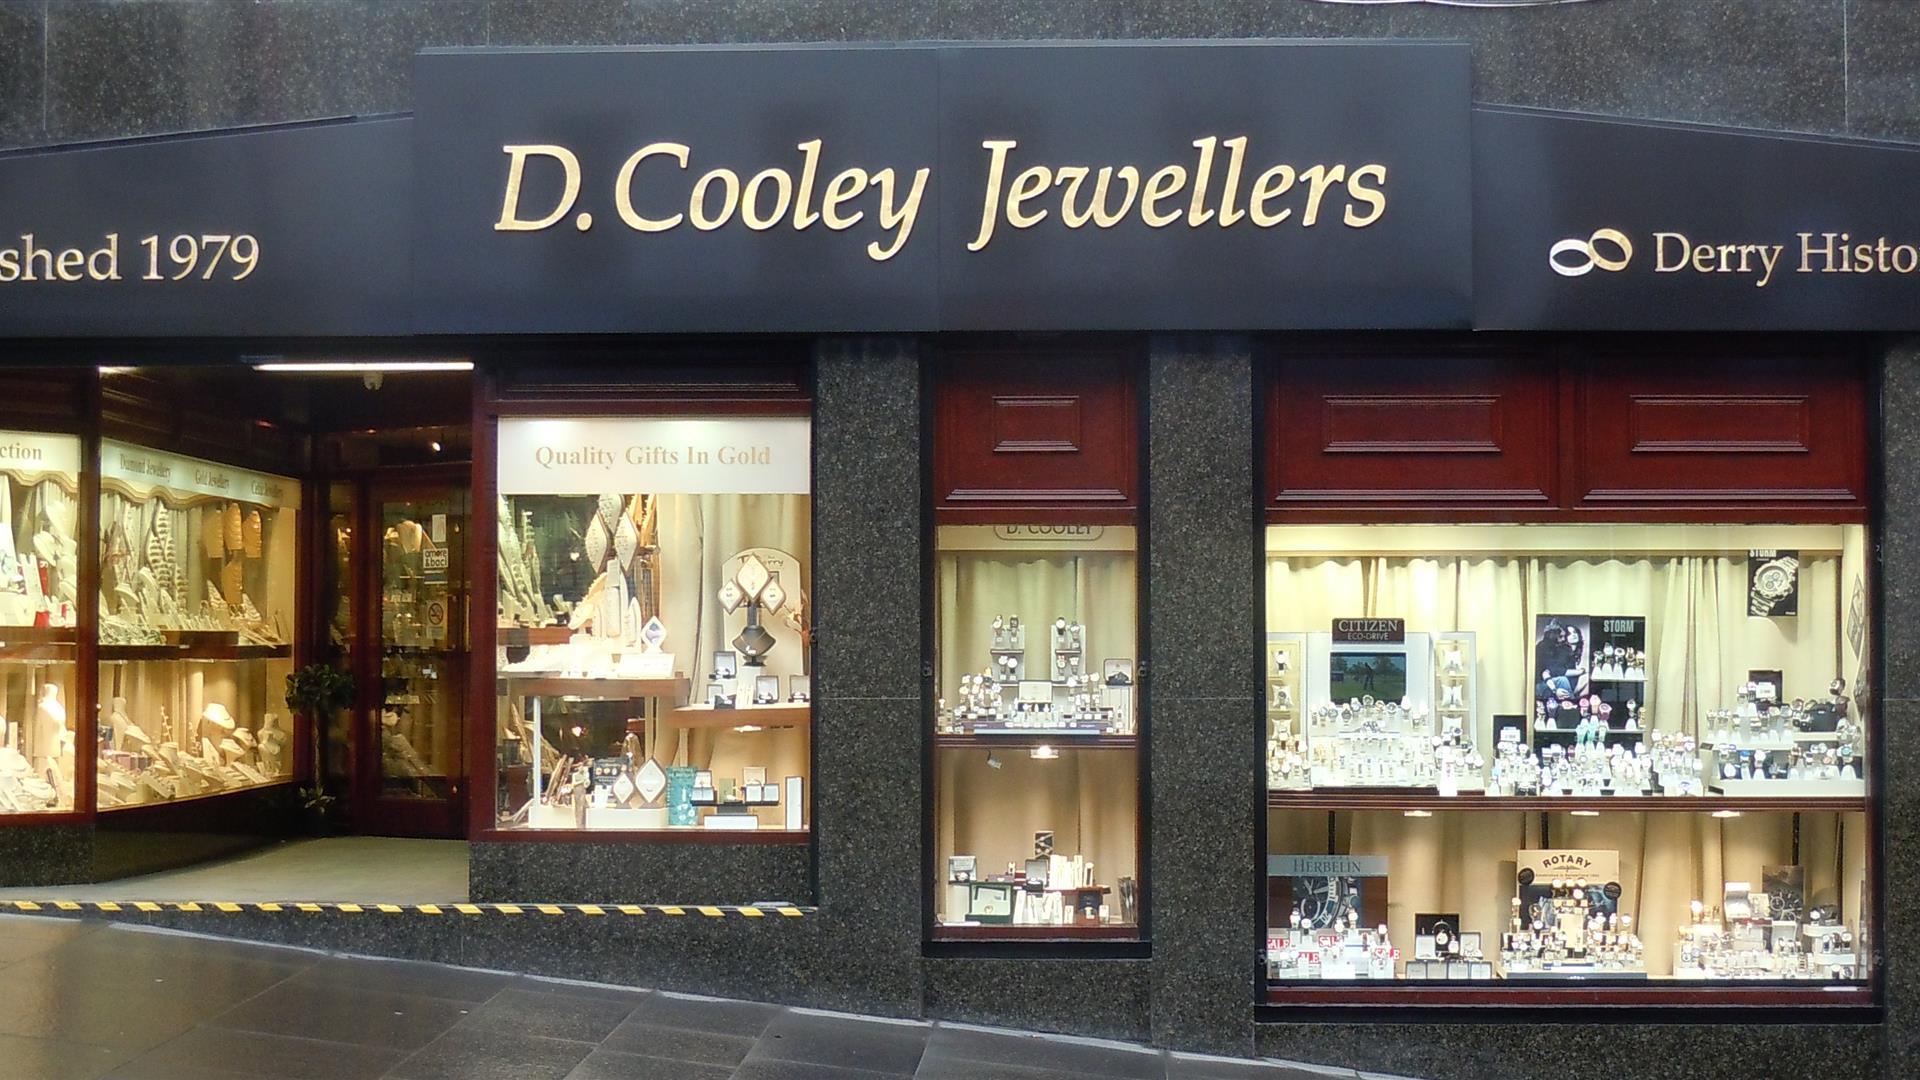 D. Cooley Jewellers